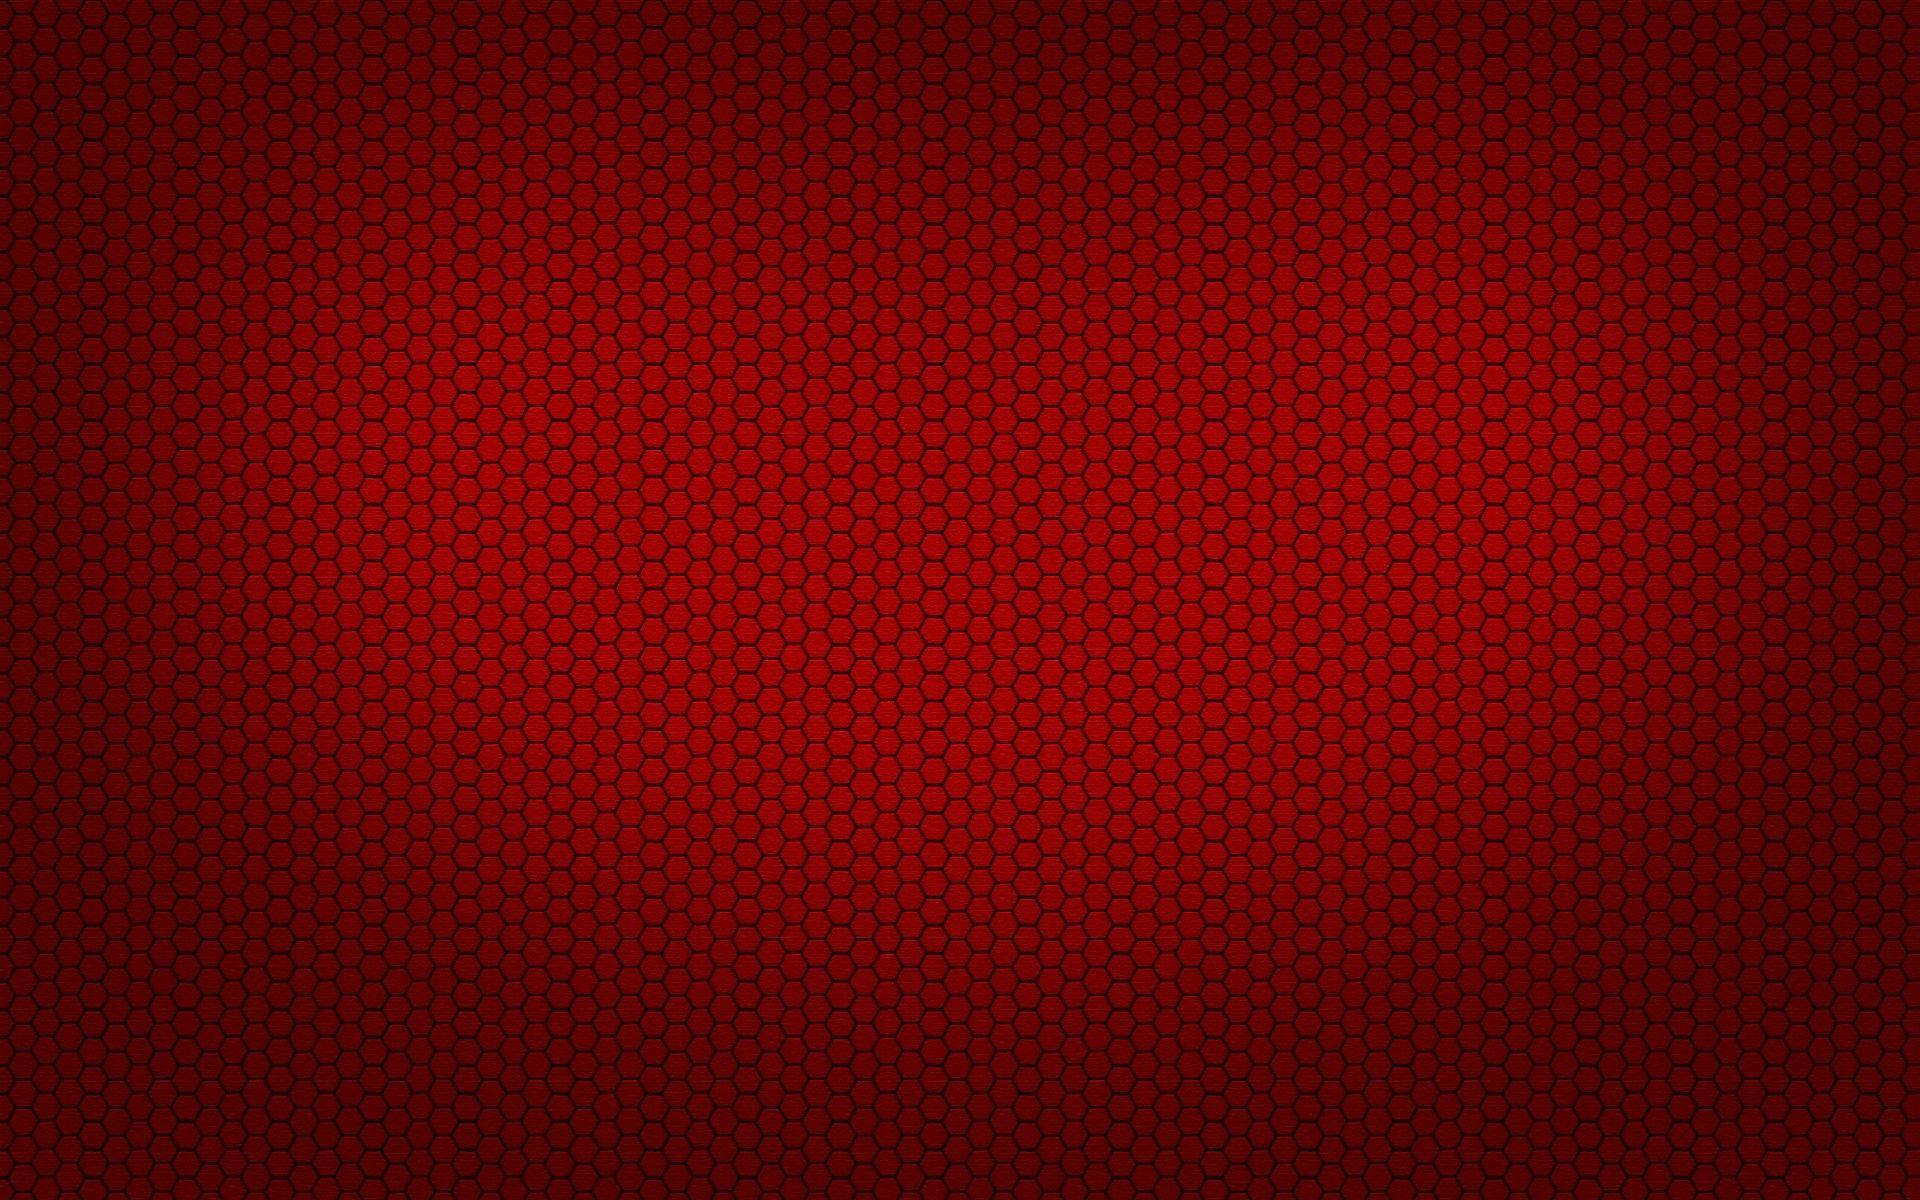 Plain Red Background 19121 1920x1200 px